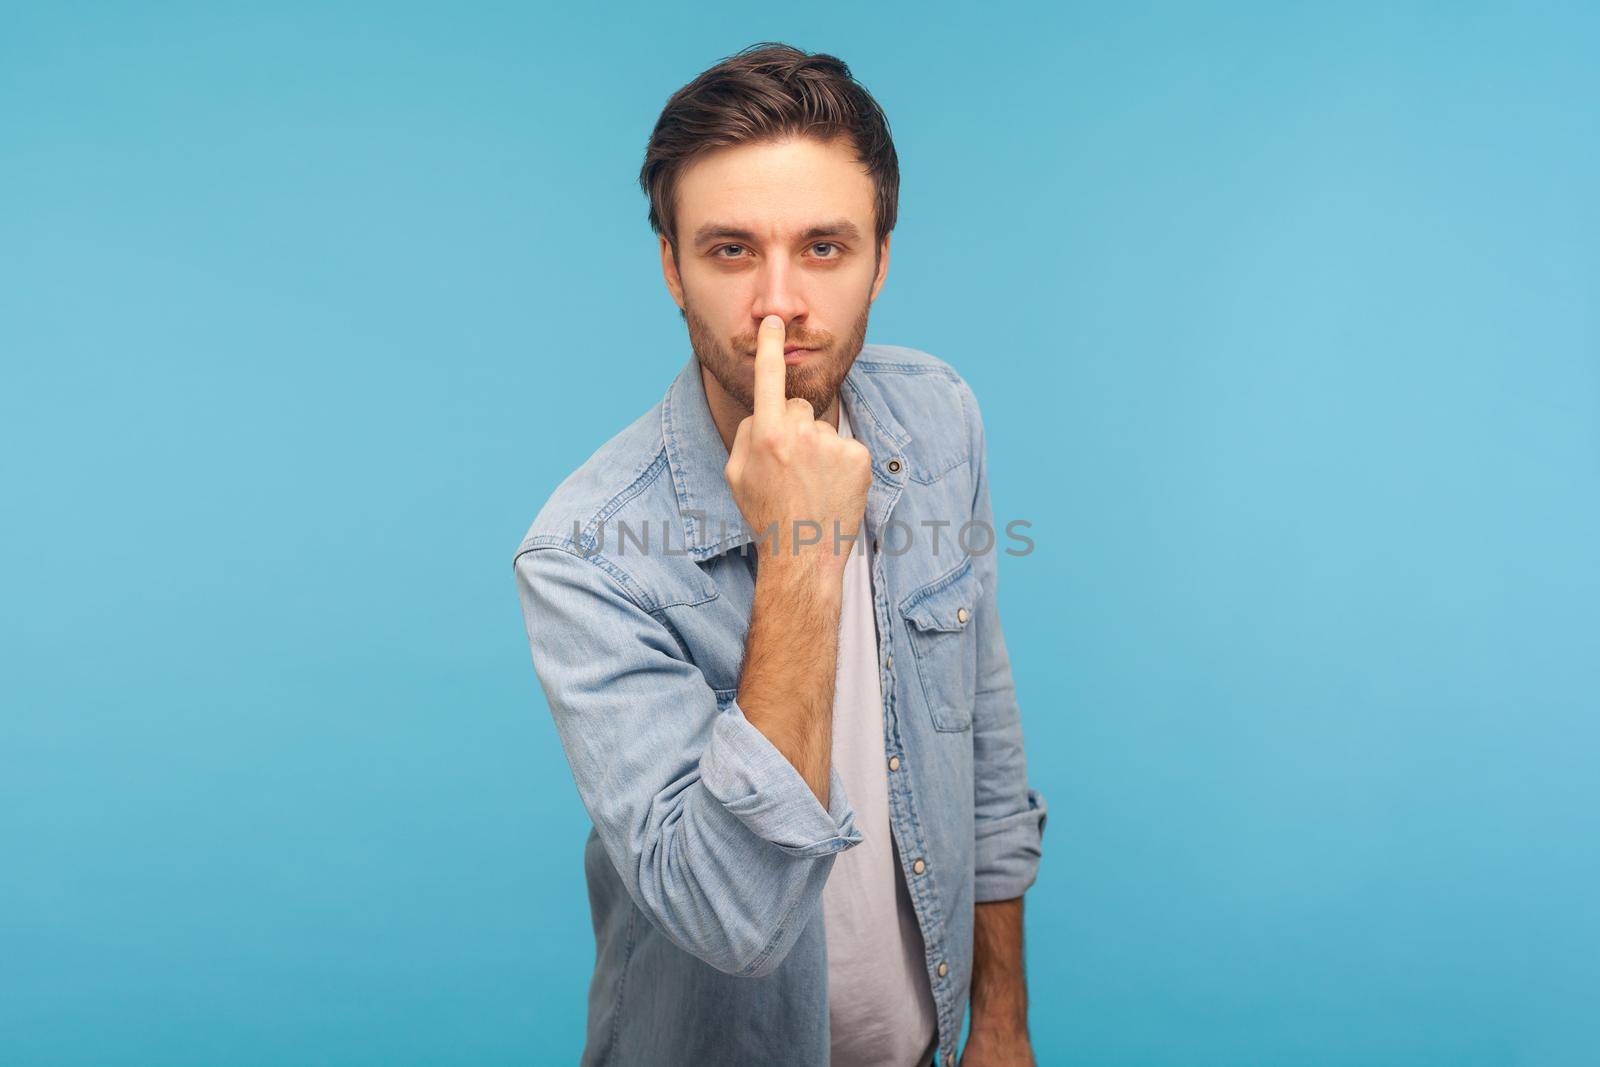 Don't lie to me. Portrait of man in worker denim shirt touching nose, showing liar gesture, angry about falsehood, outright deception, fake news. indoor studio shot isolated on blue background